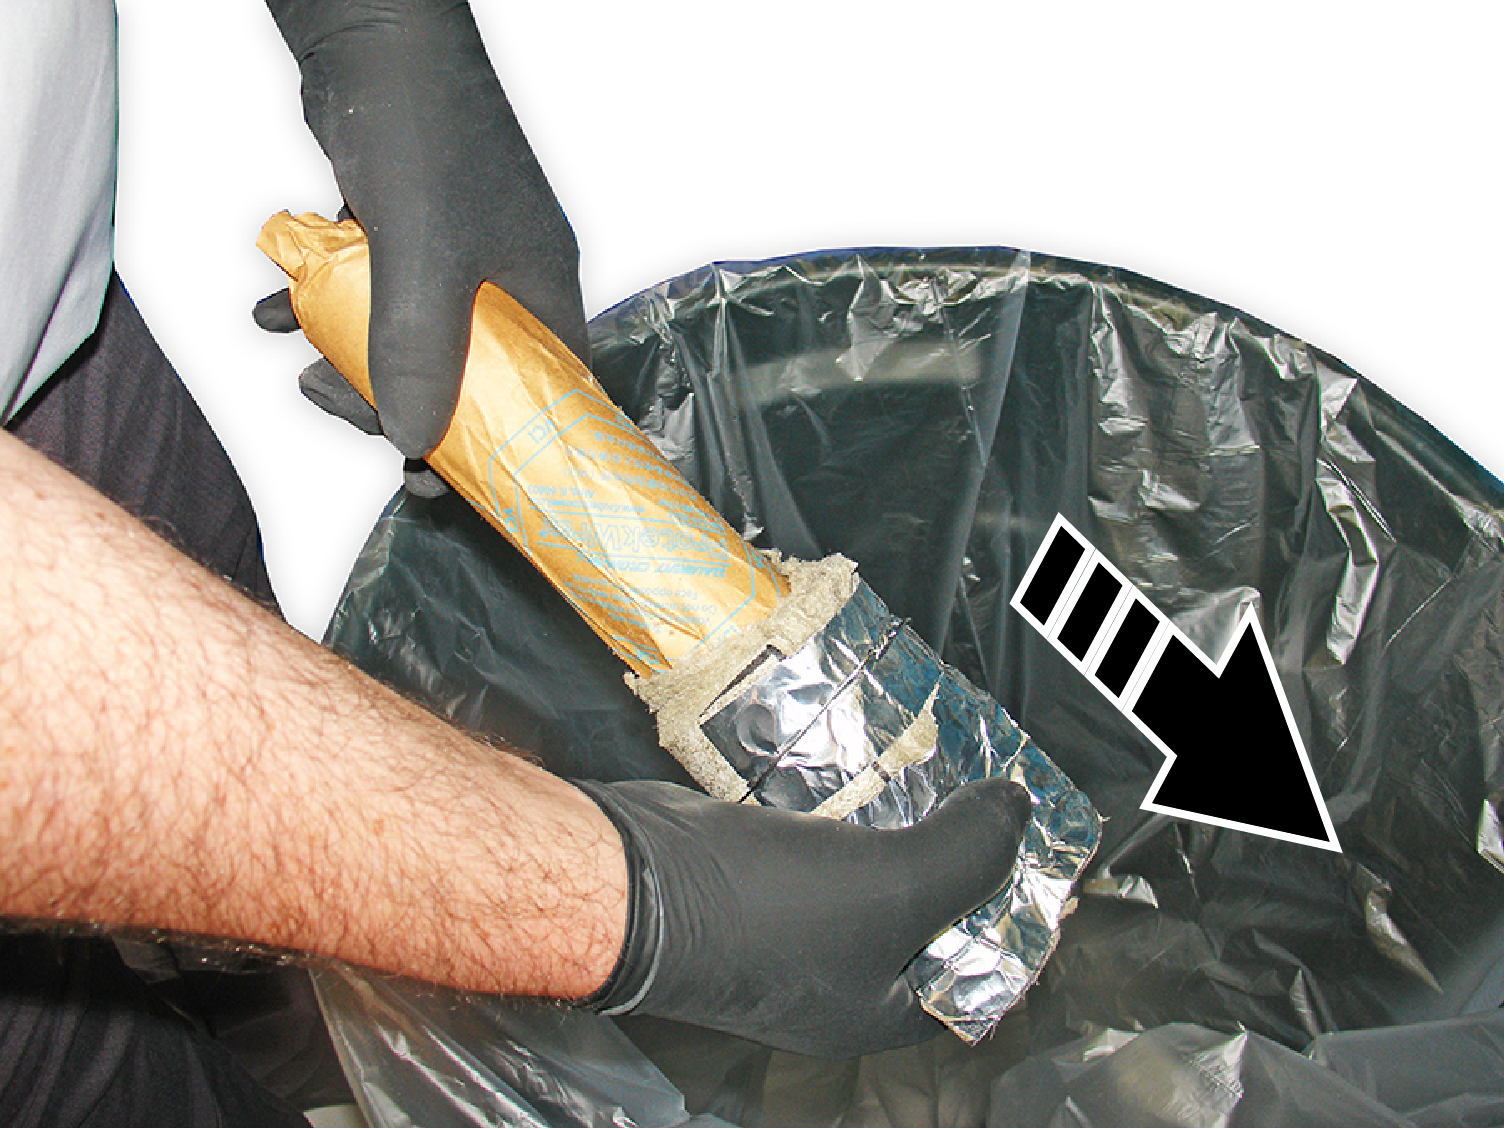 Hold the paper wrapping the inflator with one hand and slide the insulation off into the trash